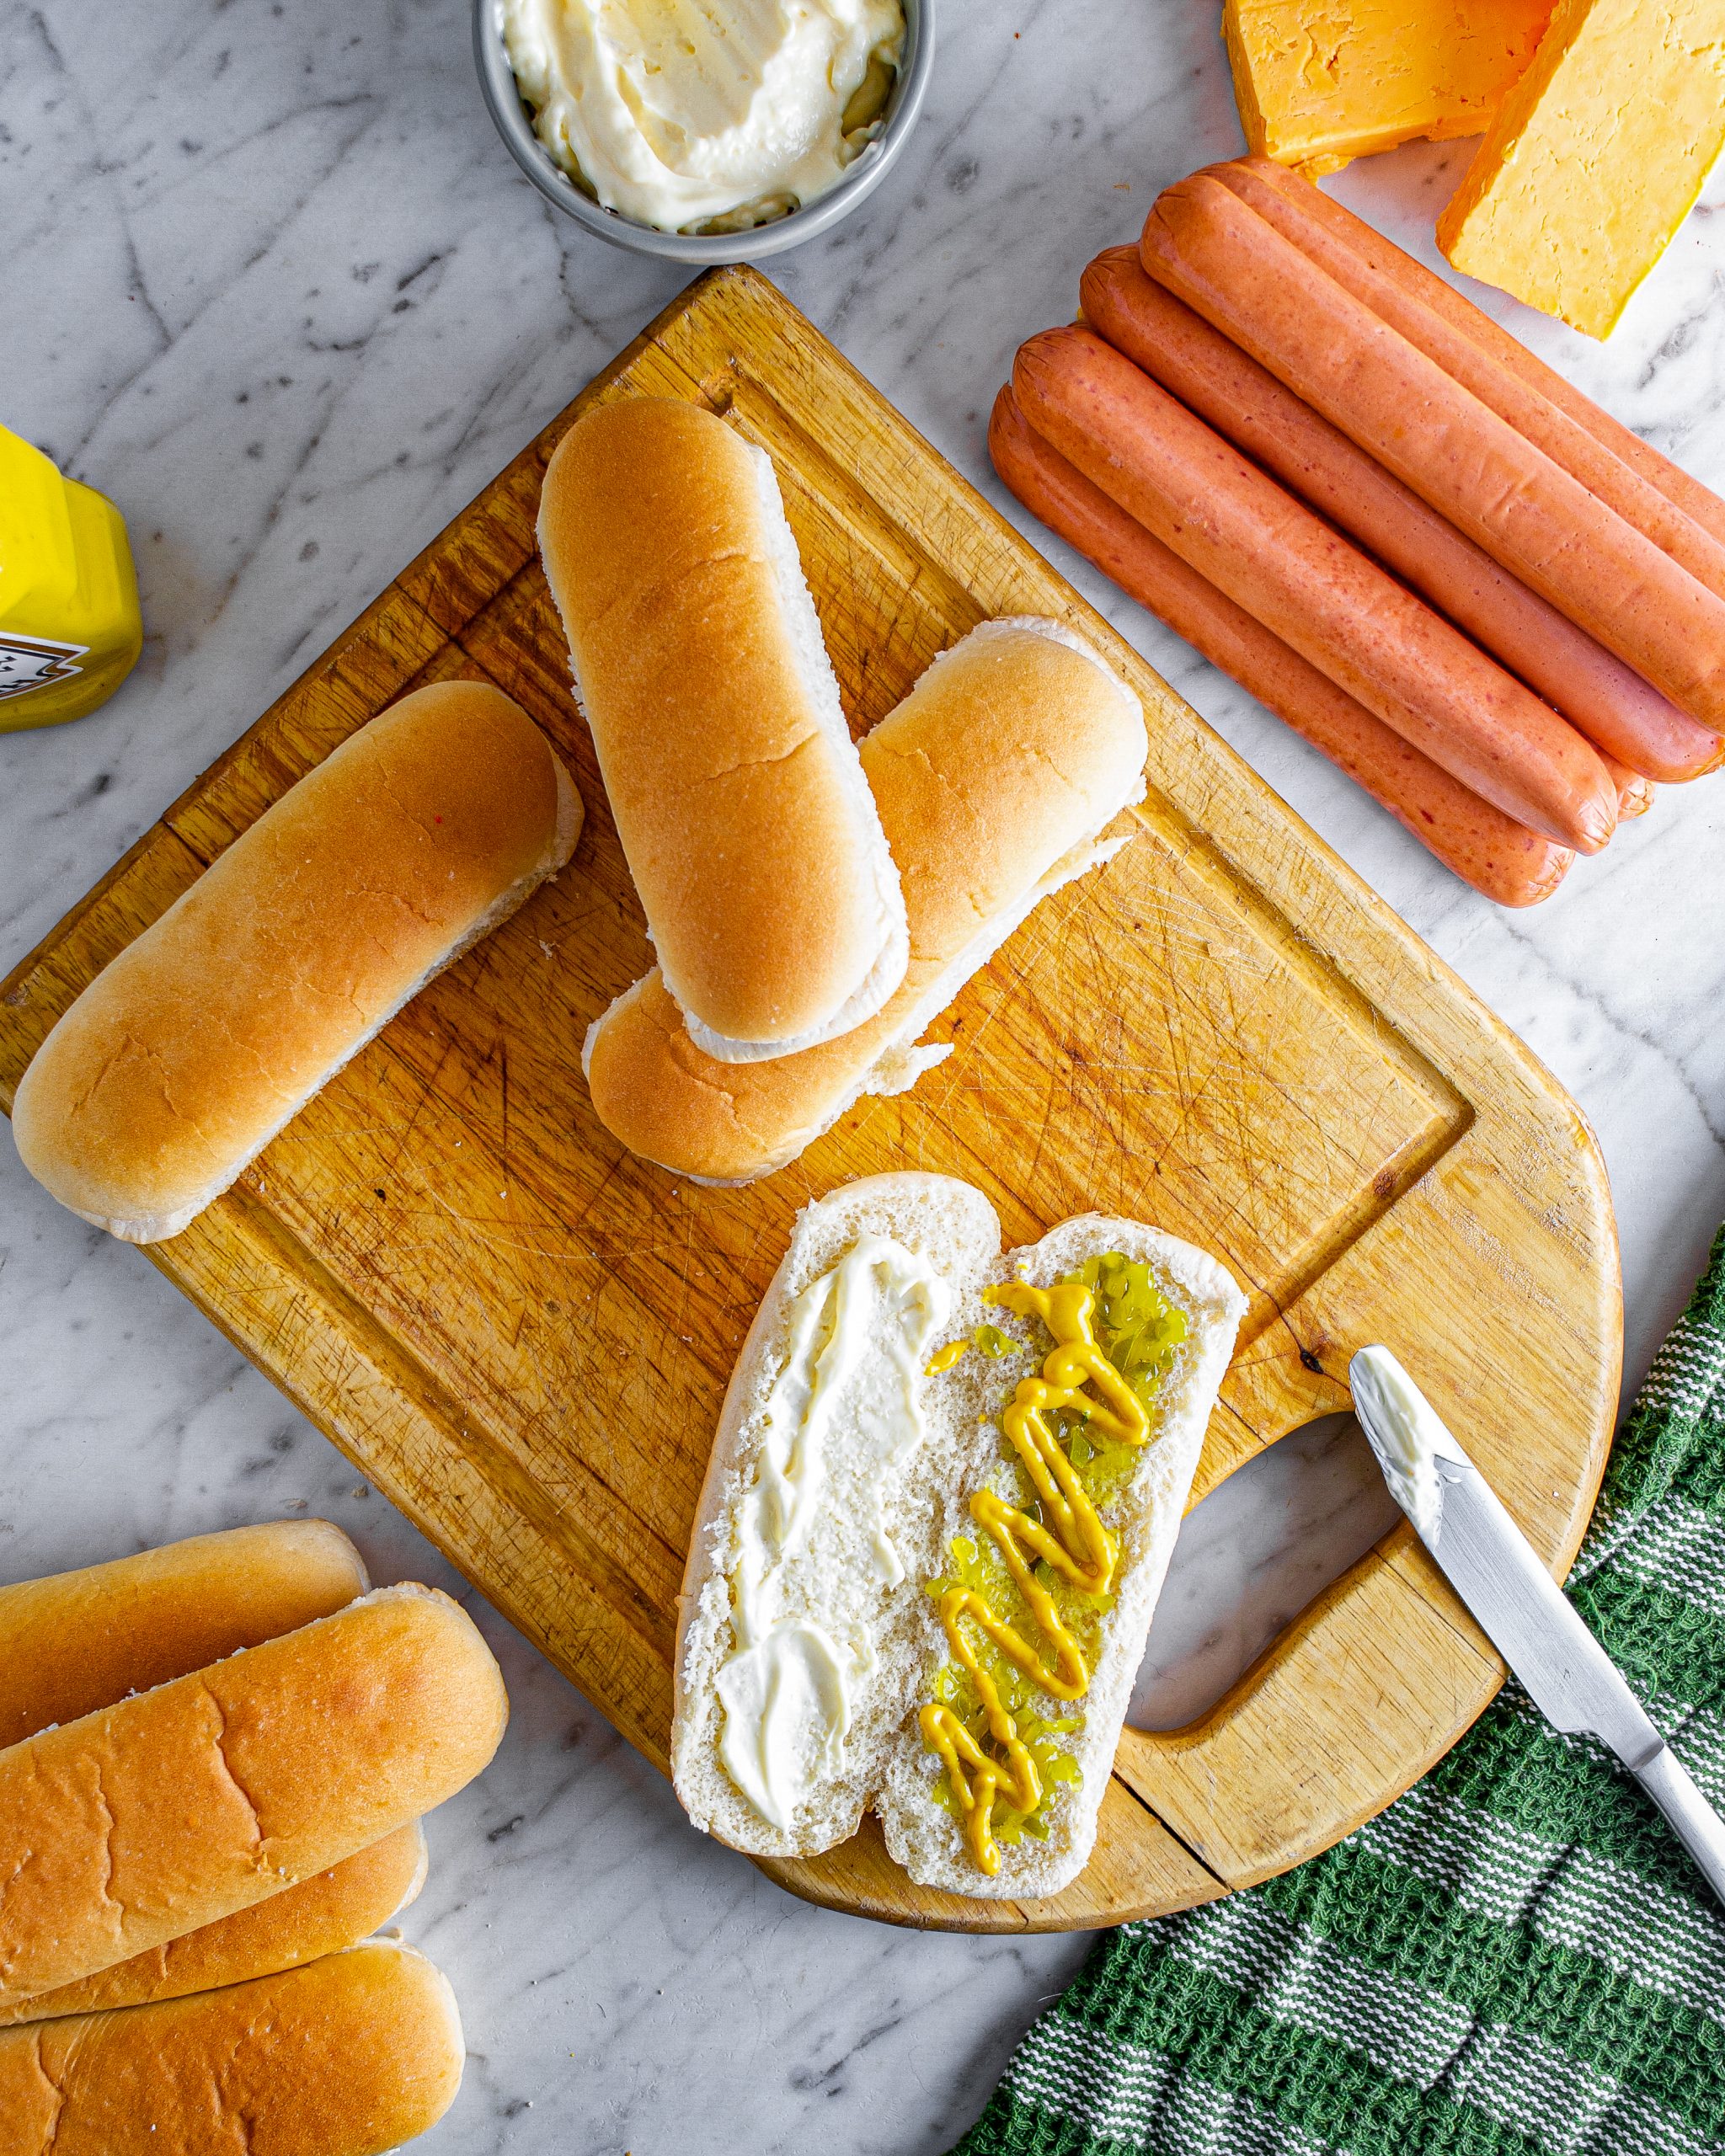 Spread relish, mustard, and mayonnaise to the inside of the hot dog buns. 